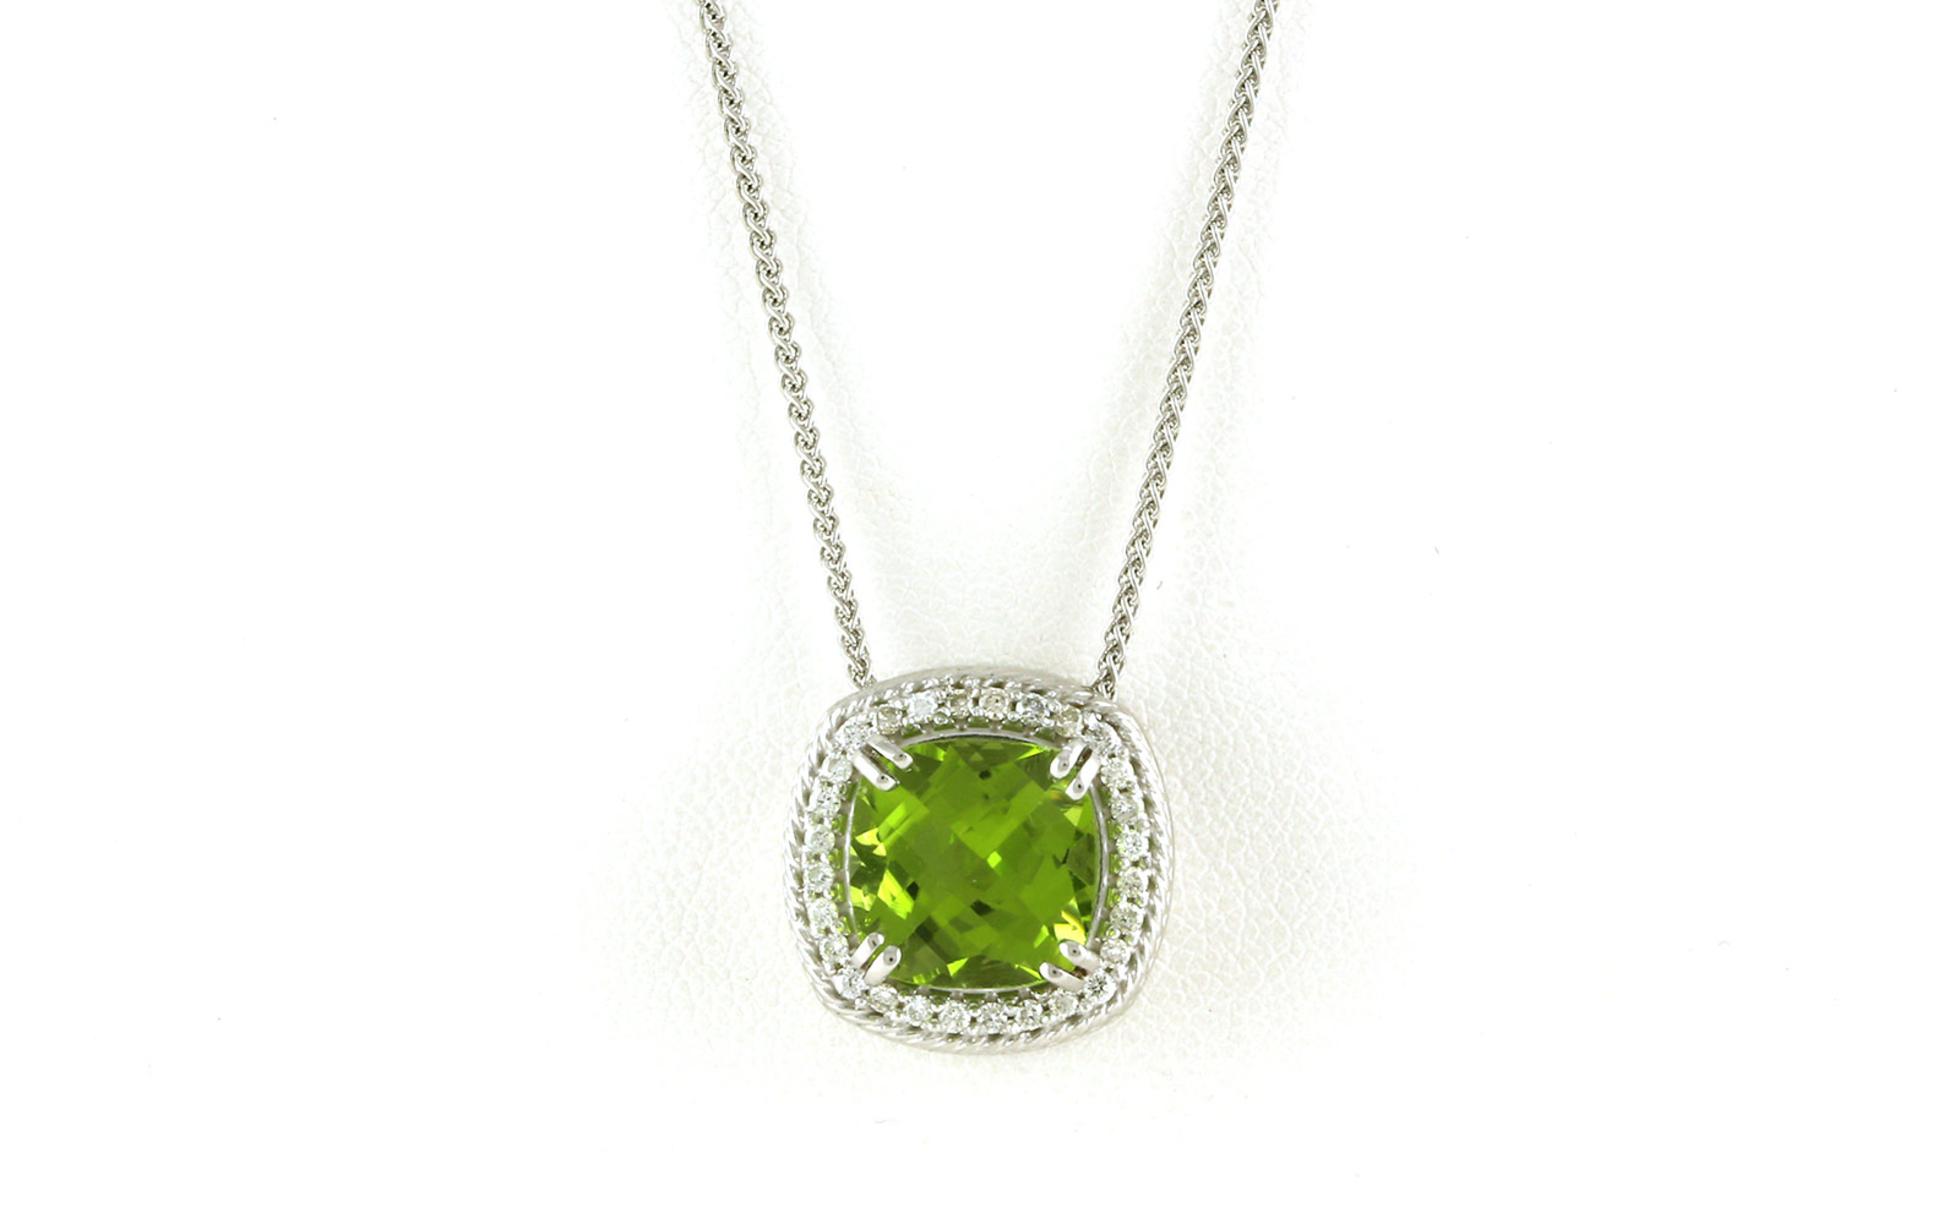 Halo-style Cushion-cut Peridot Necklace in White Gold (5.20cts TWT)